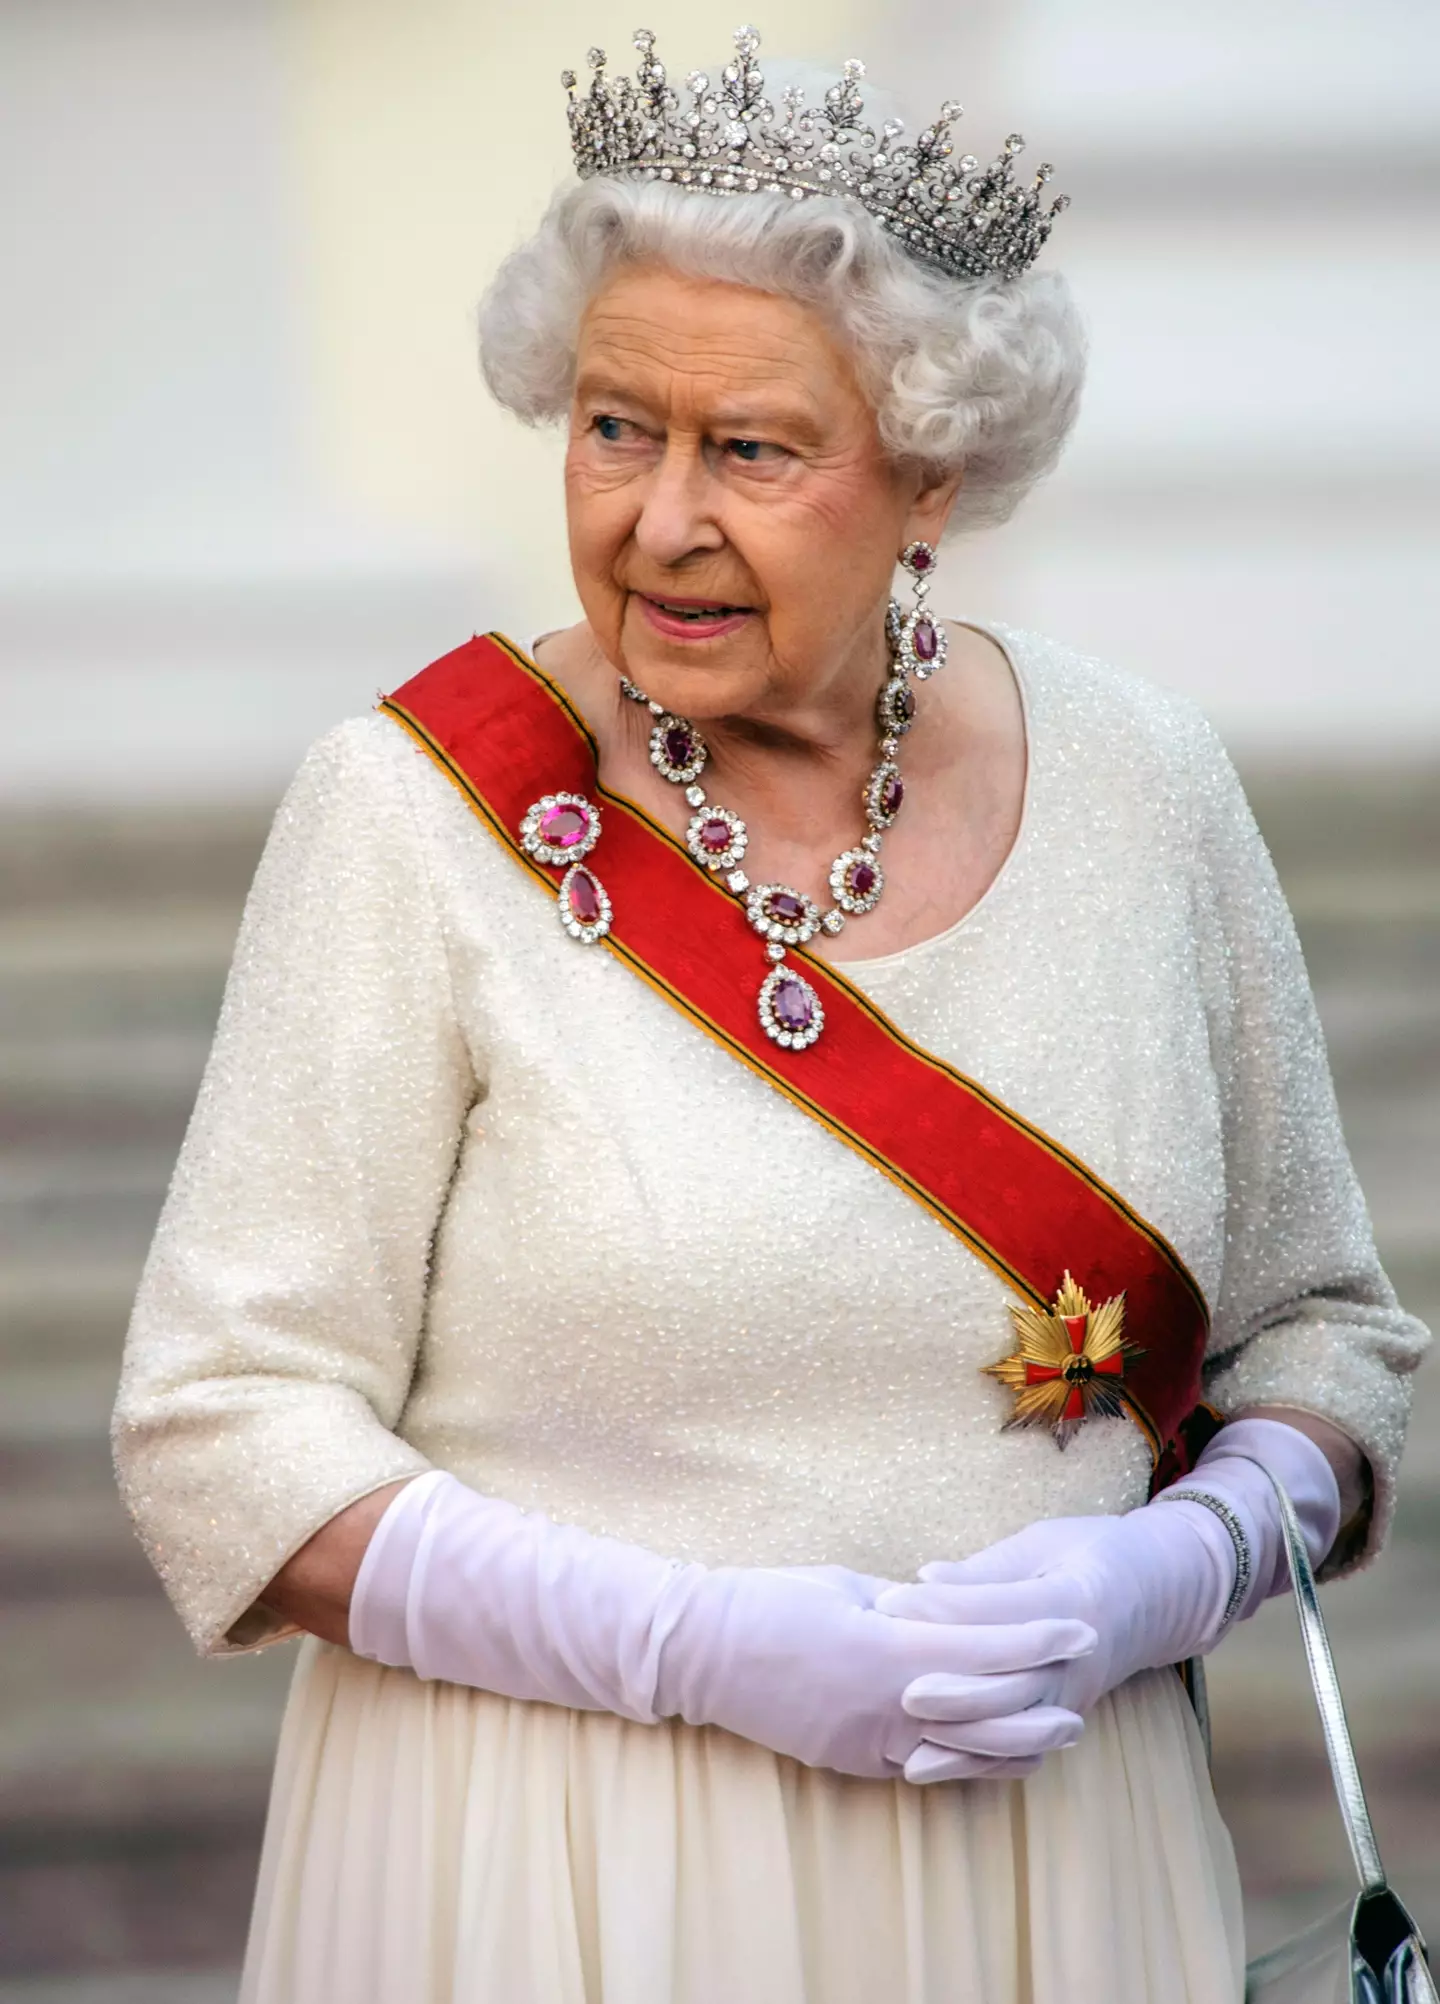 The Queen is under medical supervision.